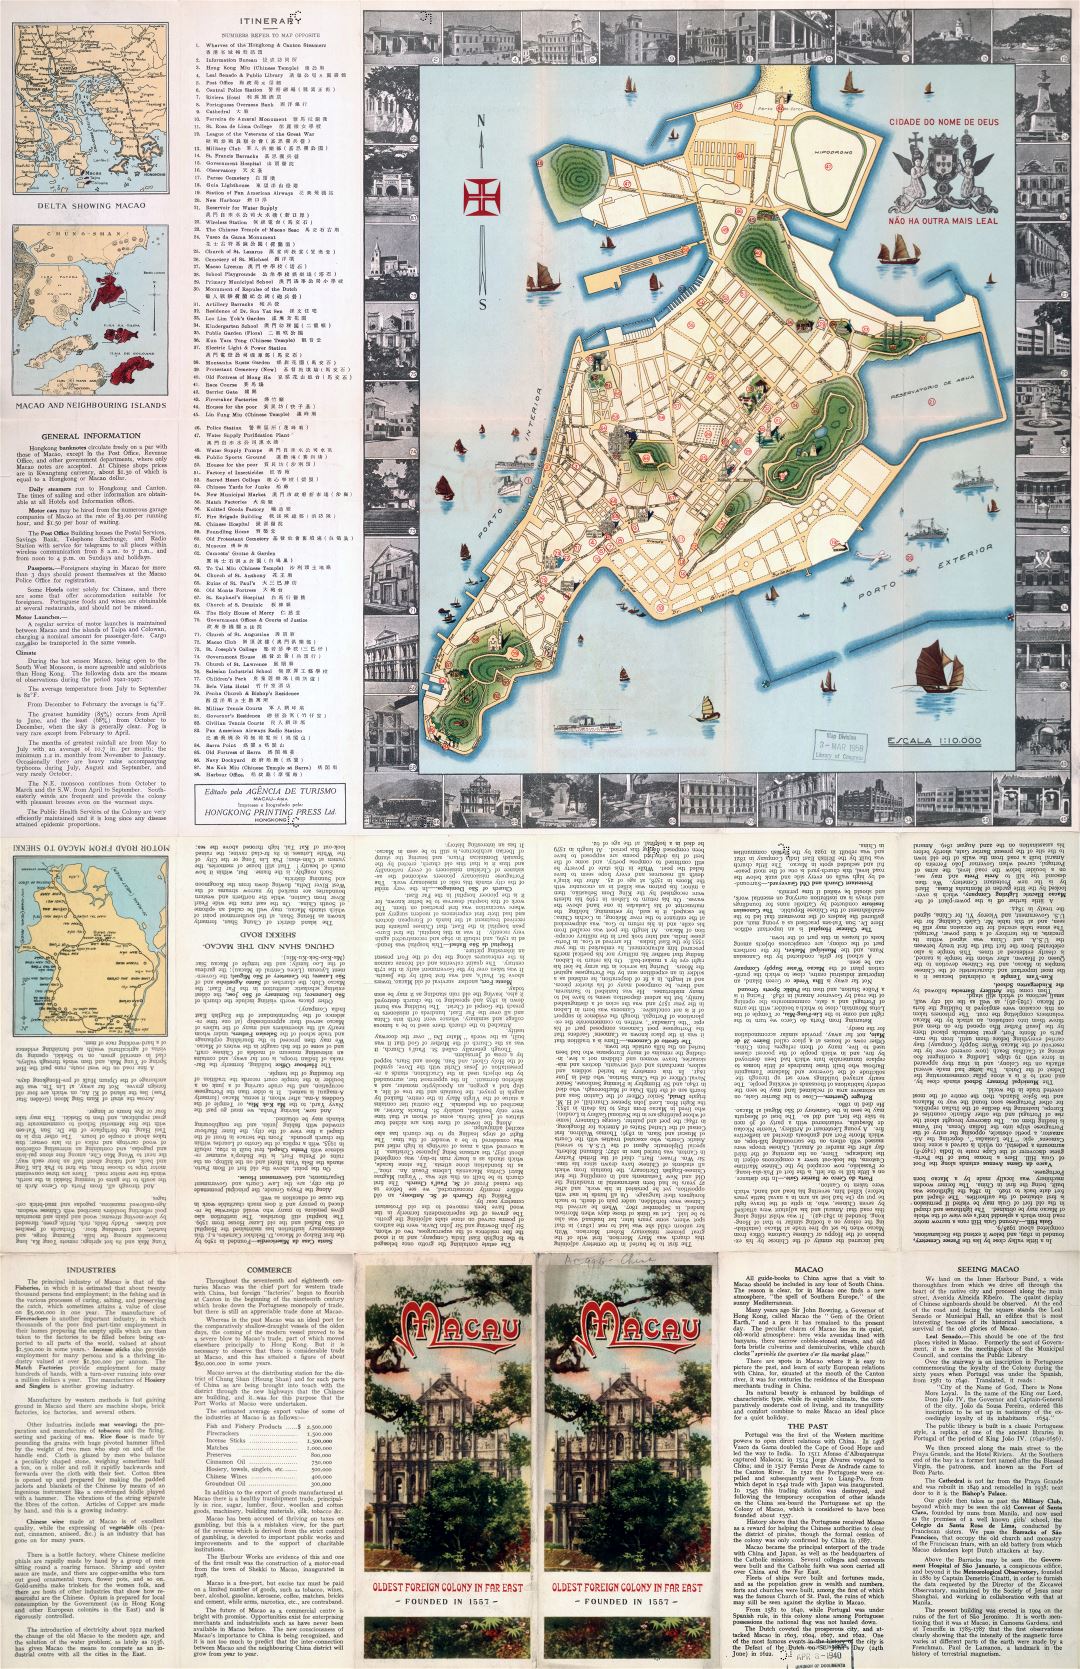 Large scale detailed old tourist map of Macau - 1936